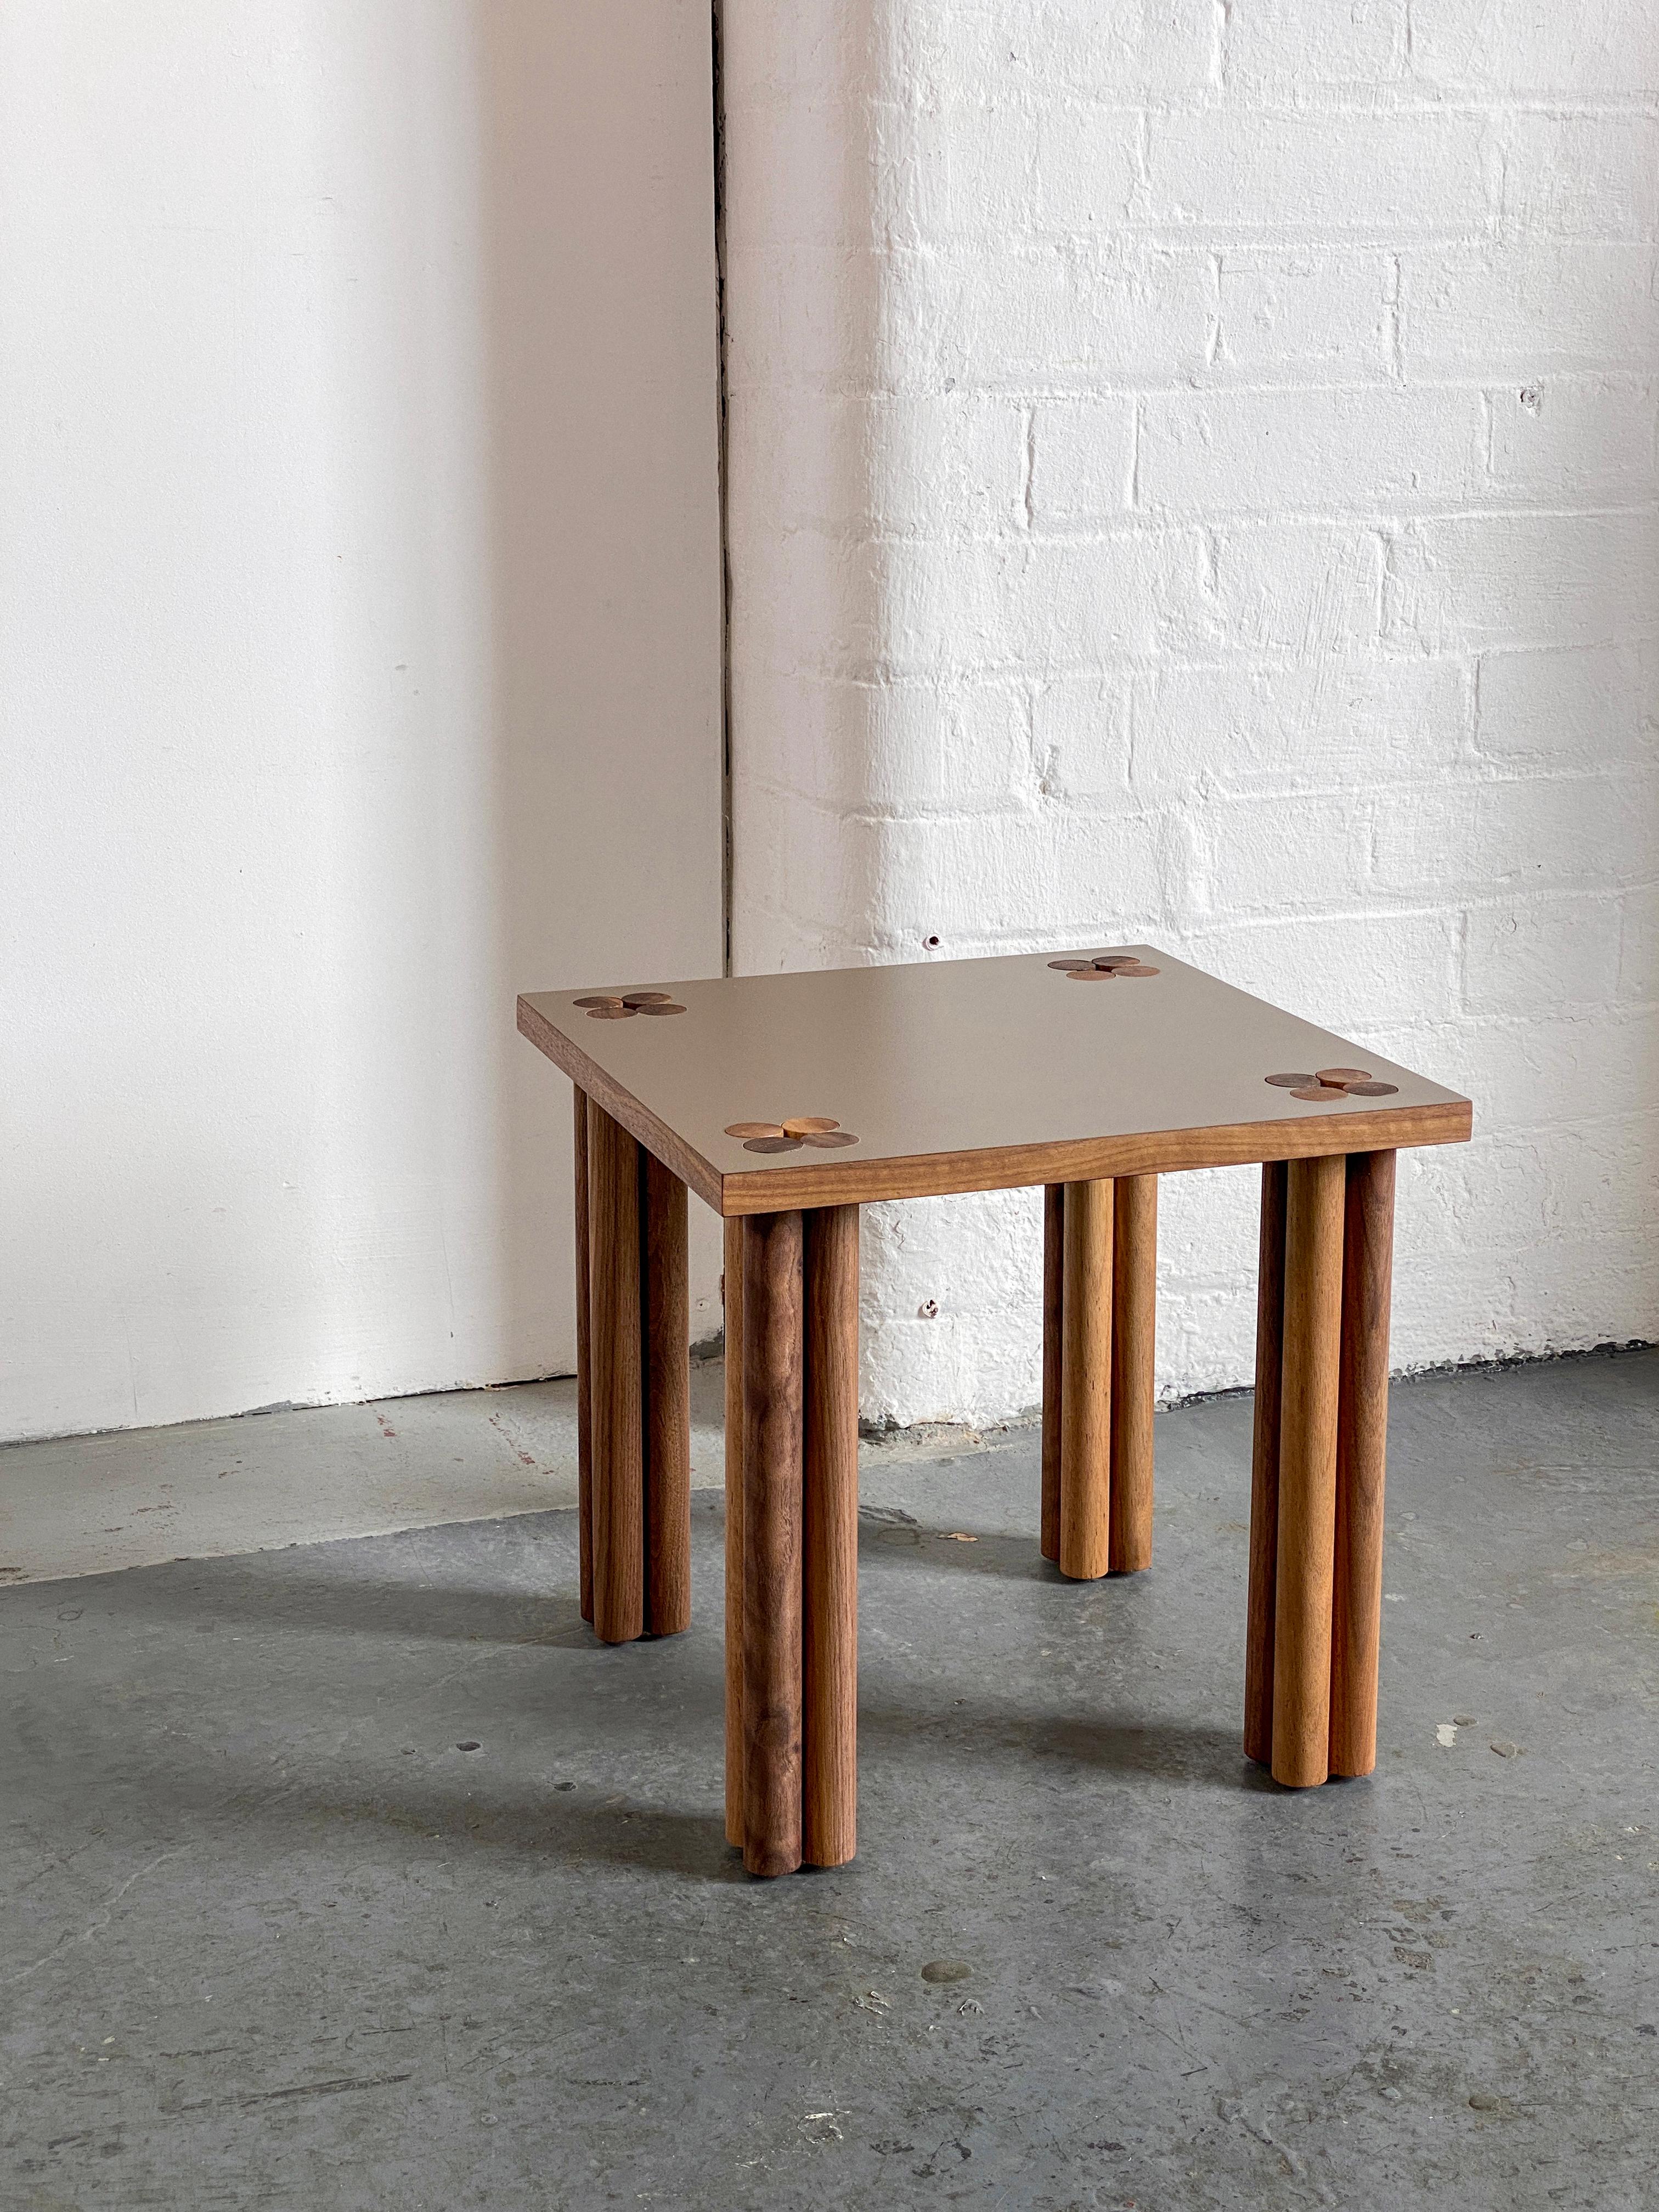 Beige & walnut Hana side table.
Dimensions: D 35 x W 35 x H 33 cm.
Materials: solid walnut wood, walnut veneer, Formica
Oak or other wood possible. 

Hana is Japanese and means flower - it is a collection of side tables and a sideboard. The